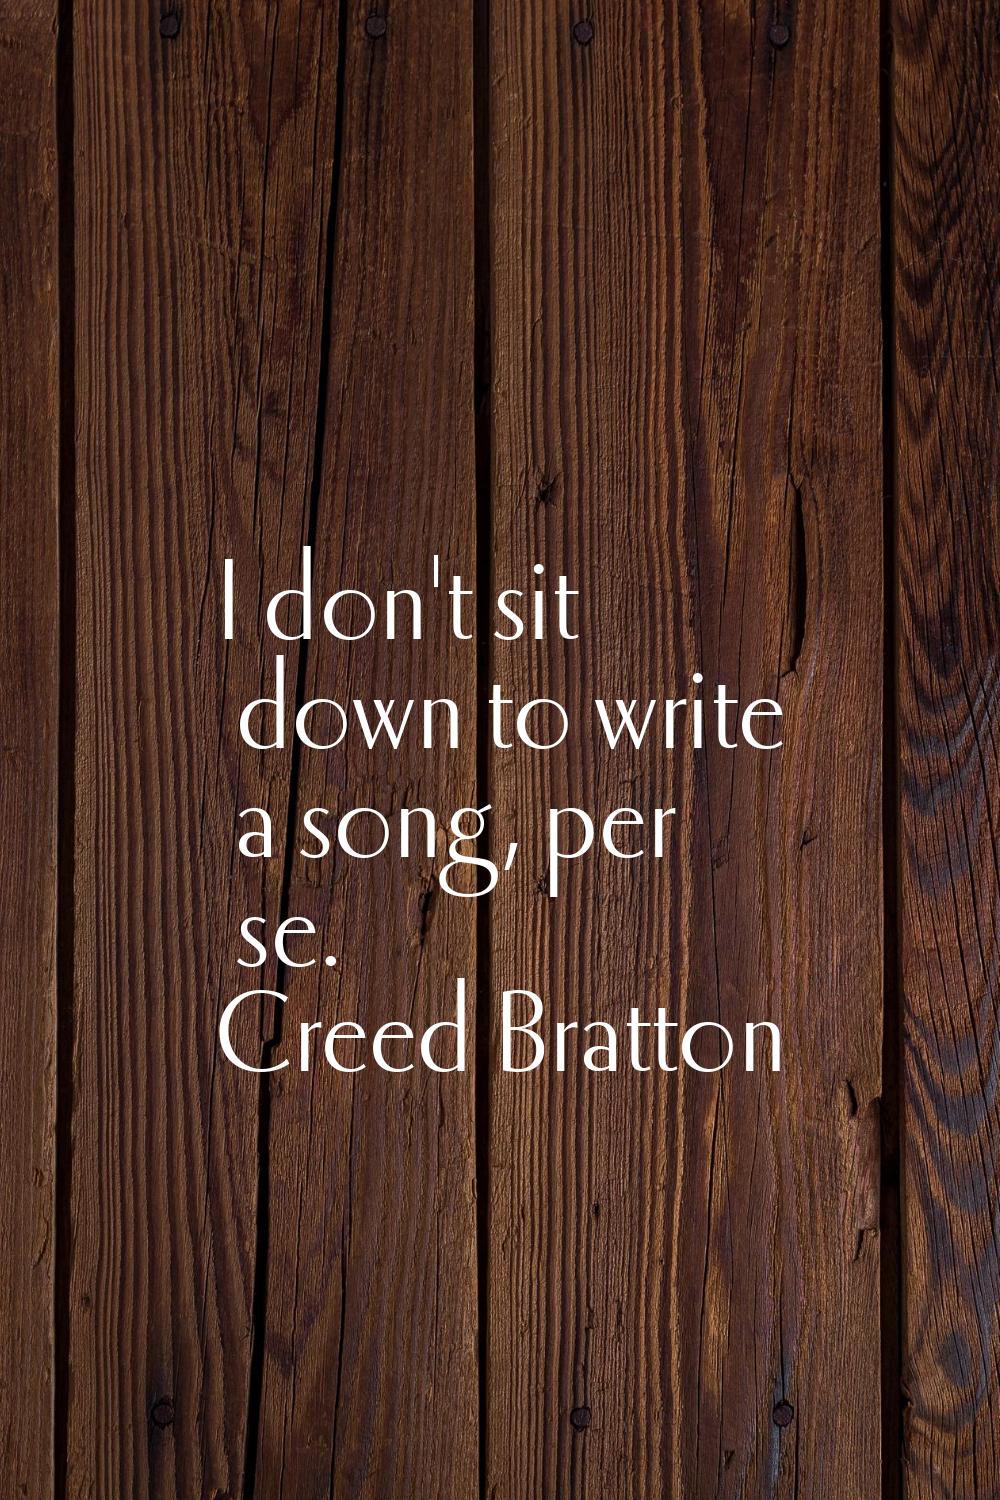 I don't sit down to write a song, per se.